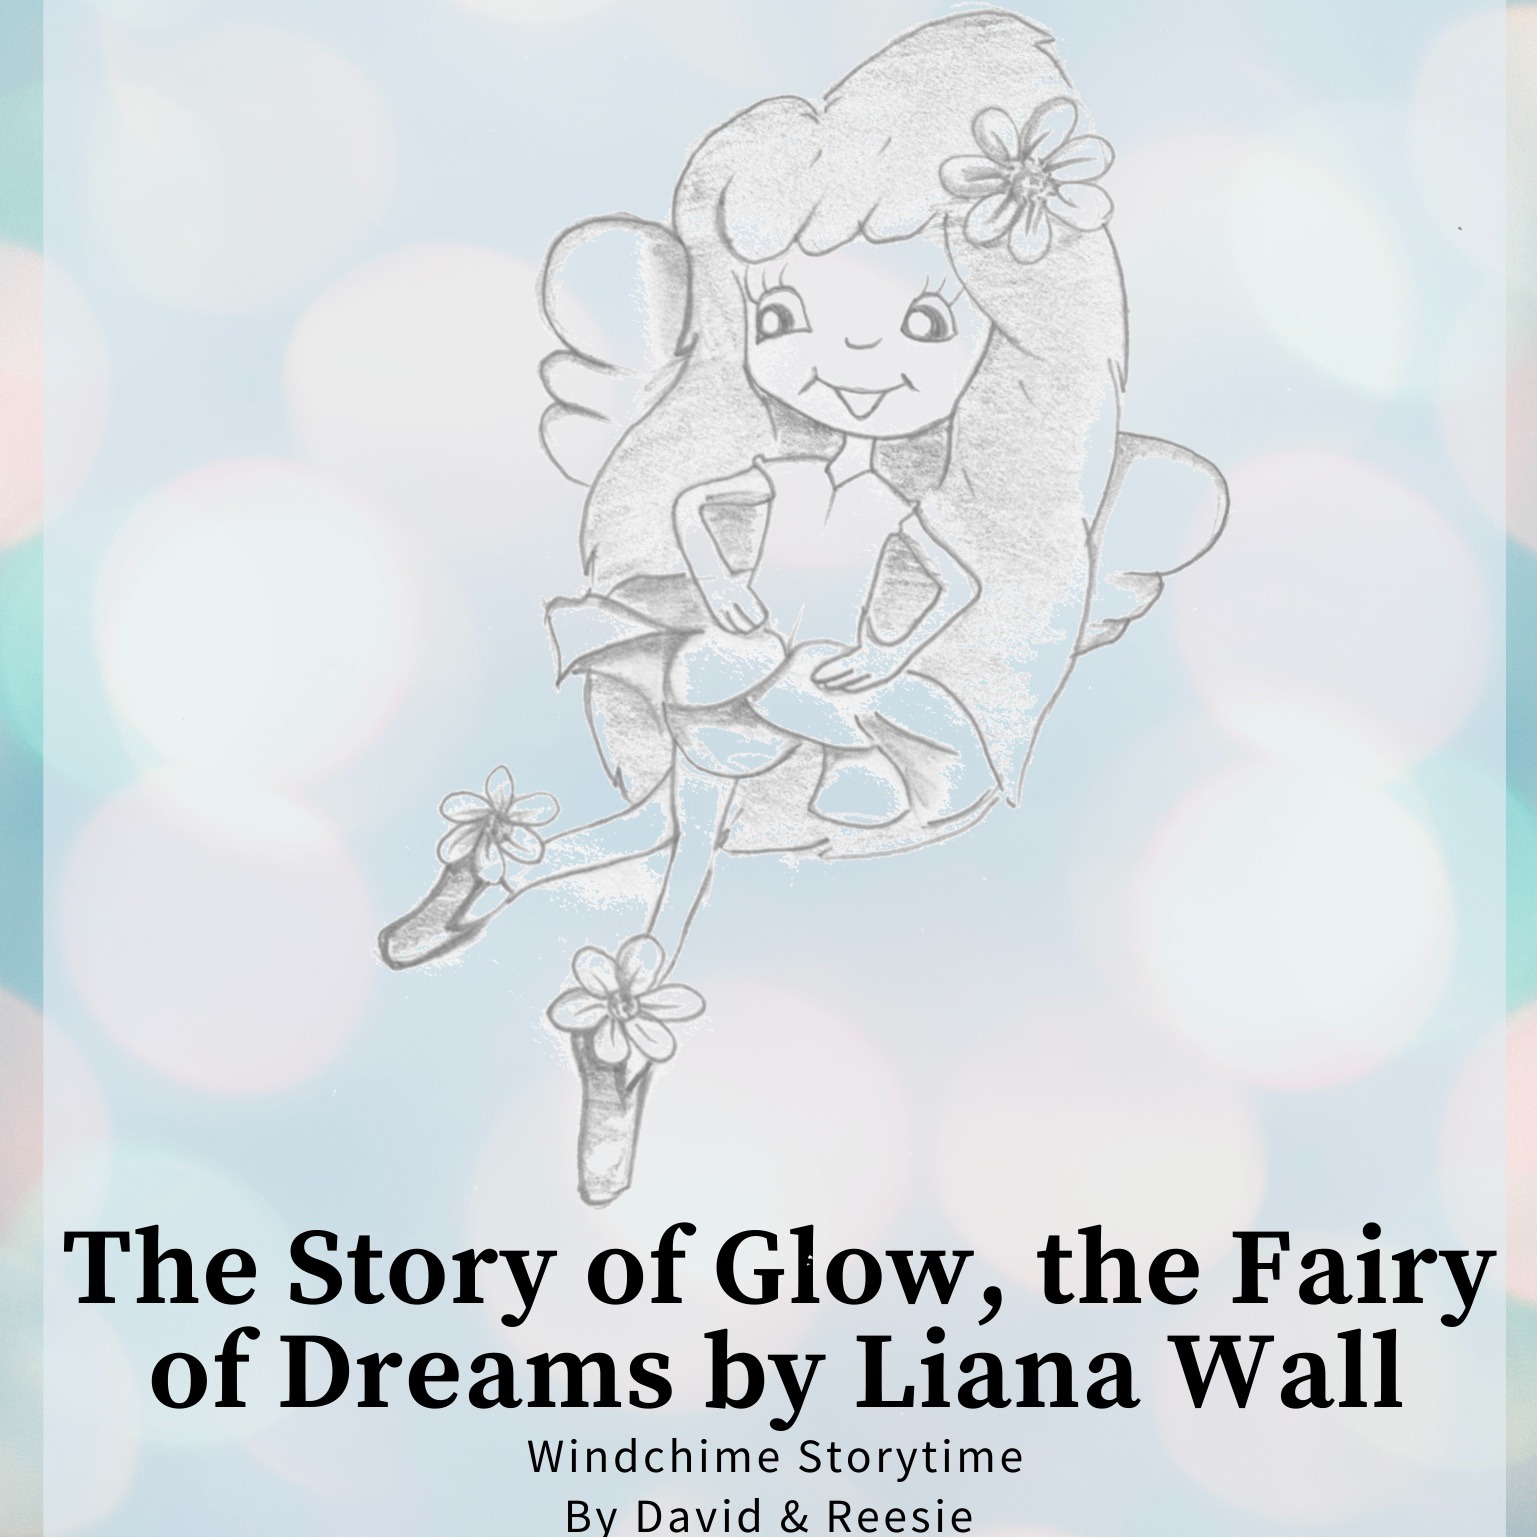 11- The Story of Glow, the Fairy of Dreams